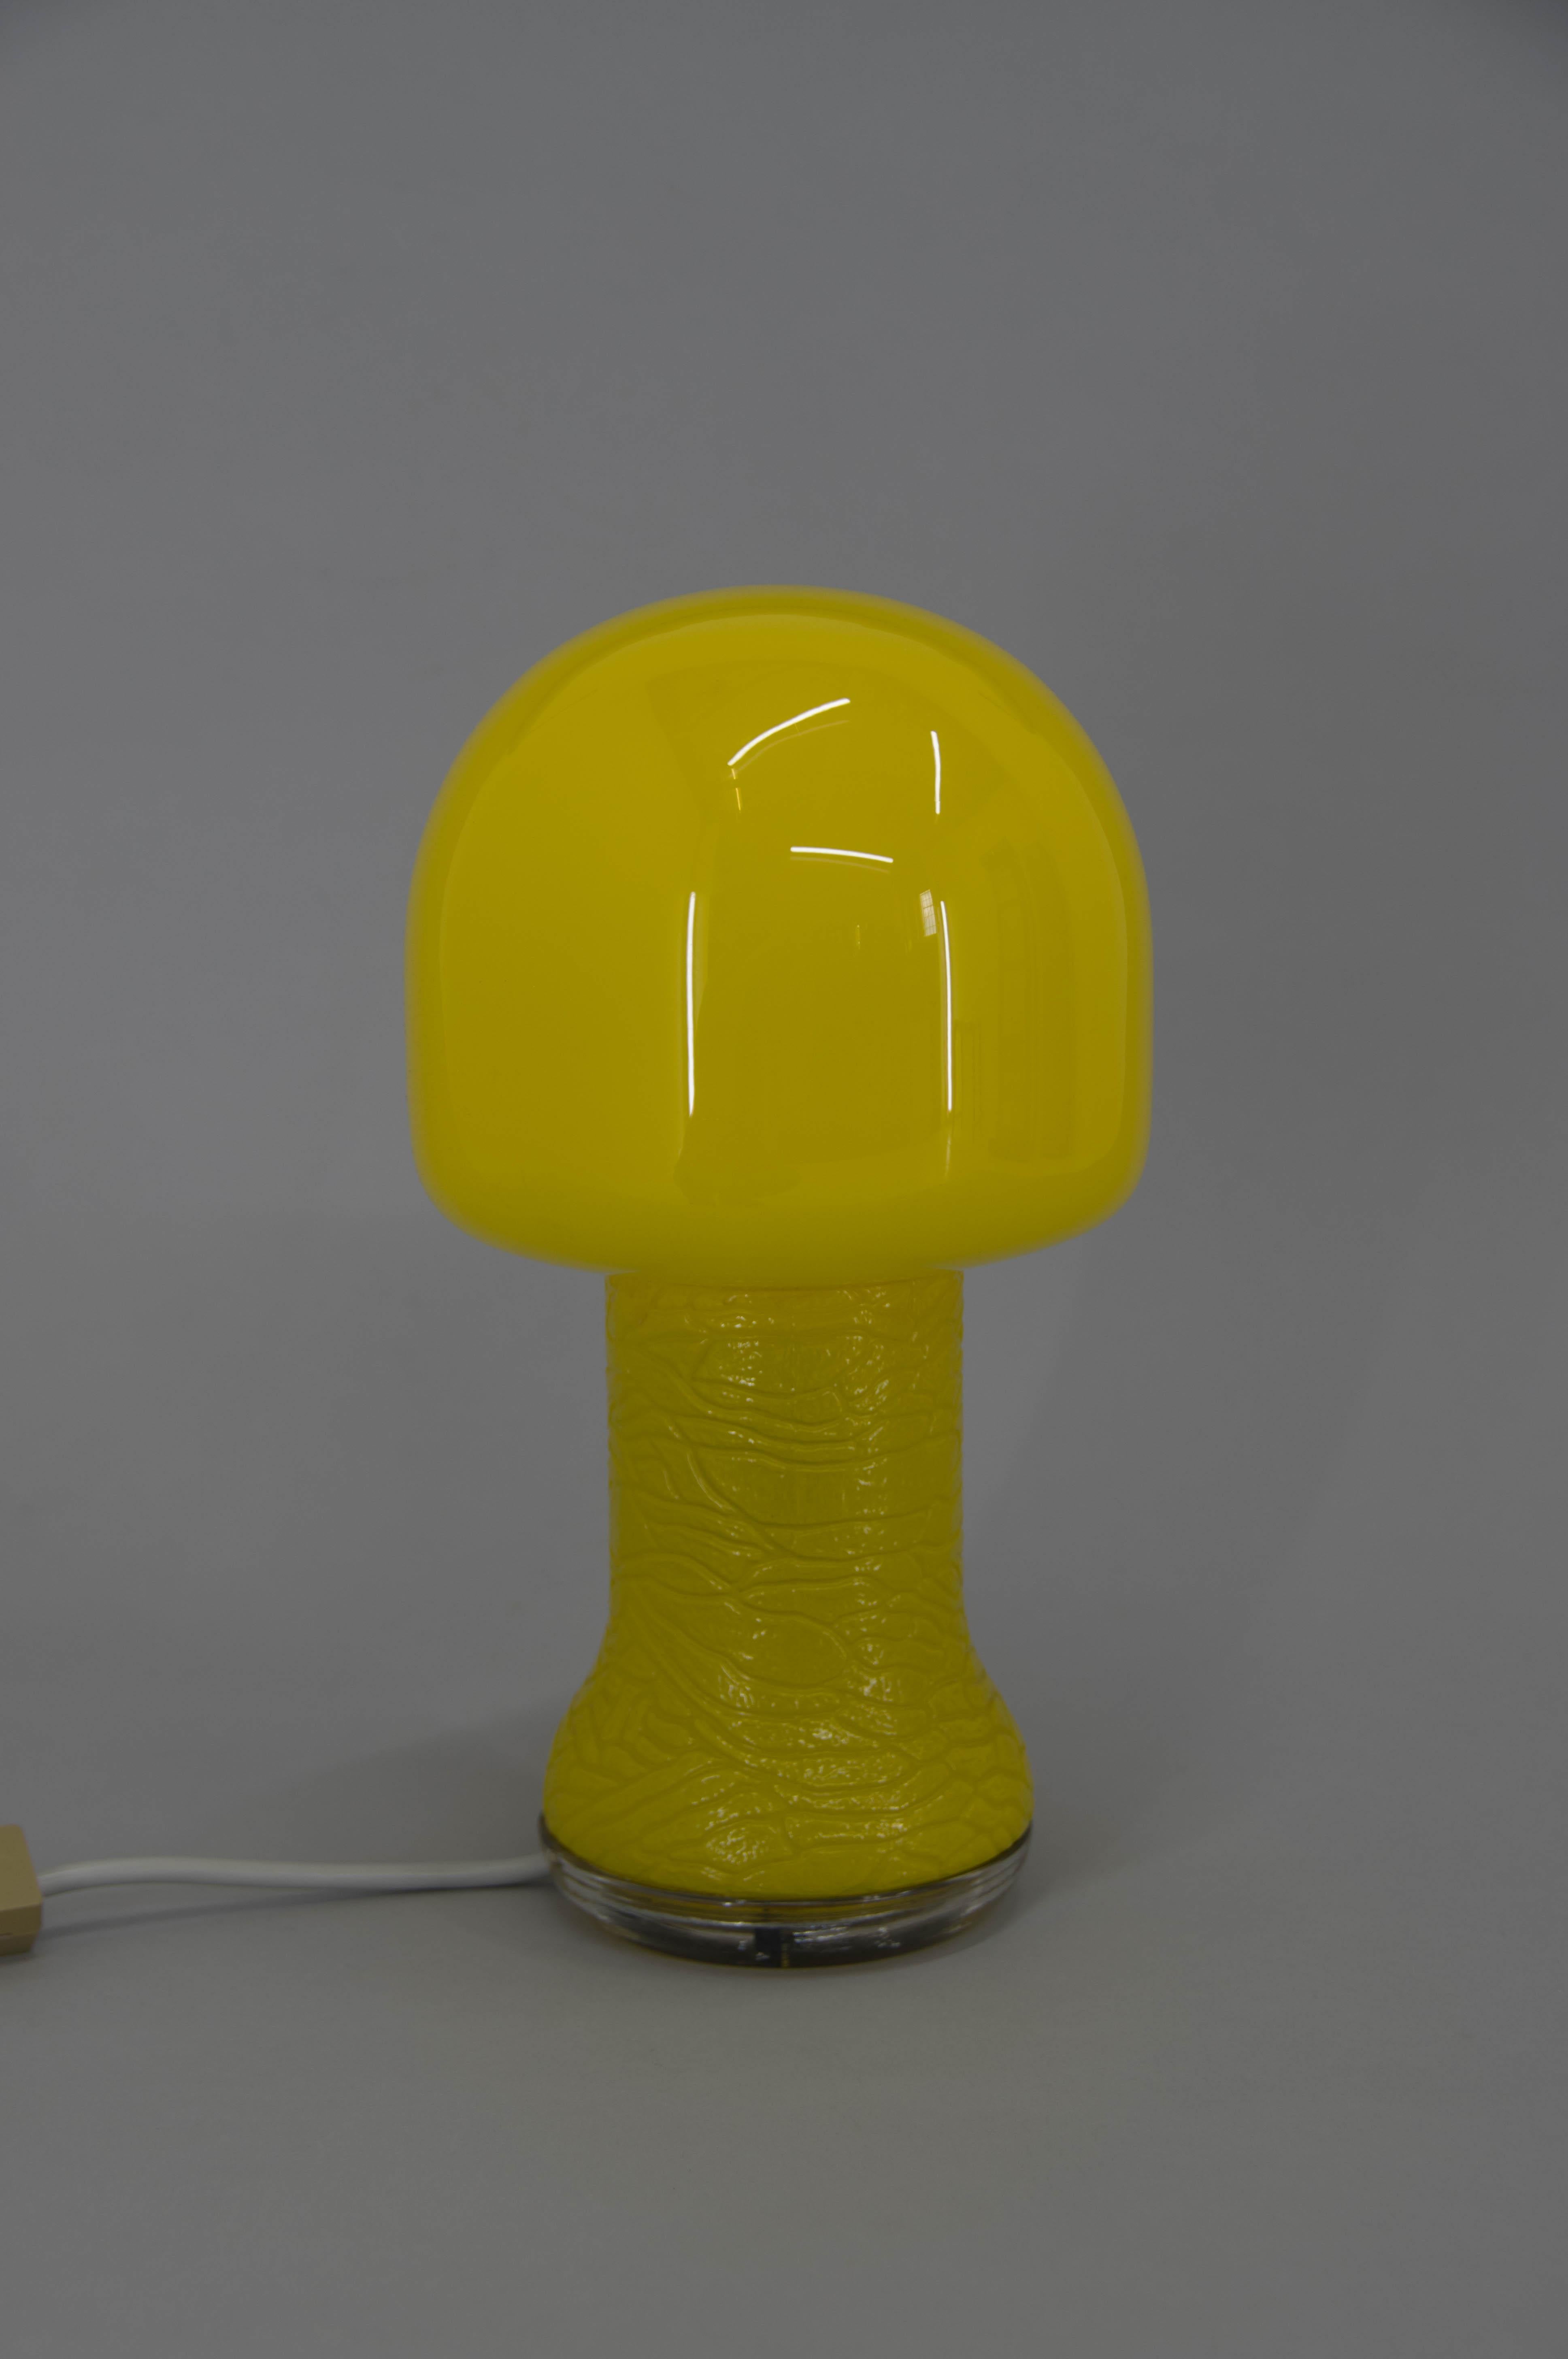 Yellow glass table lamp produced in Germany in 1970s
Very good original condition
1x60W, E25-E27 bulb
US plug adapter included